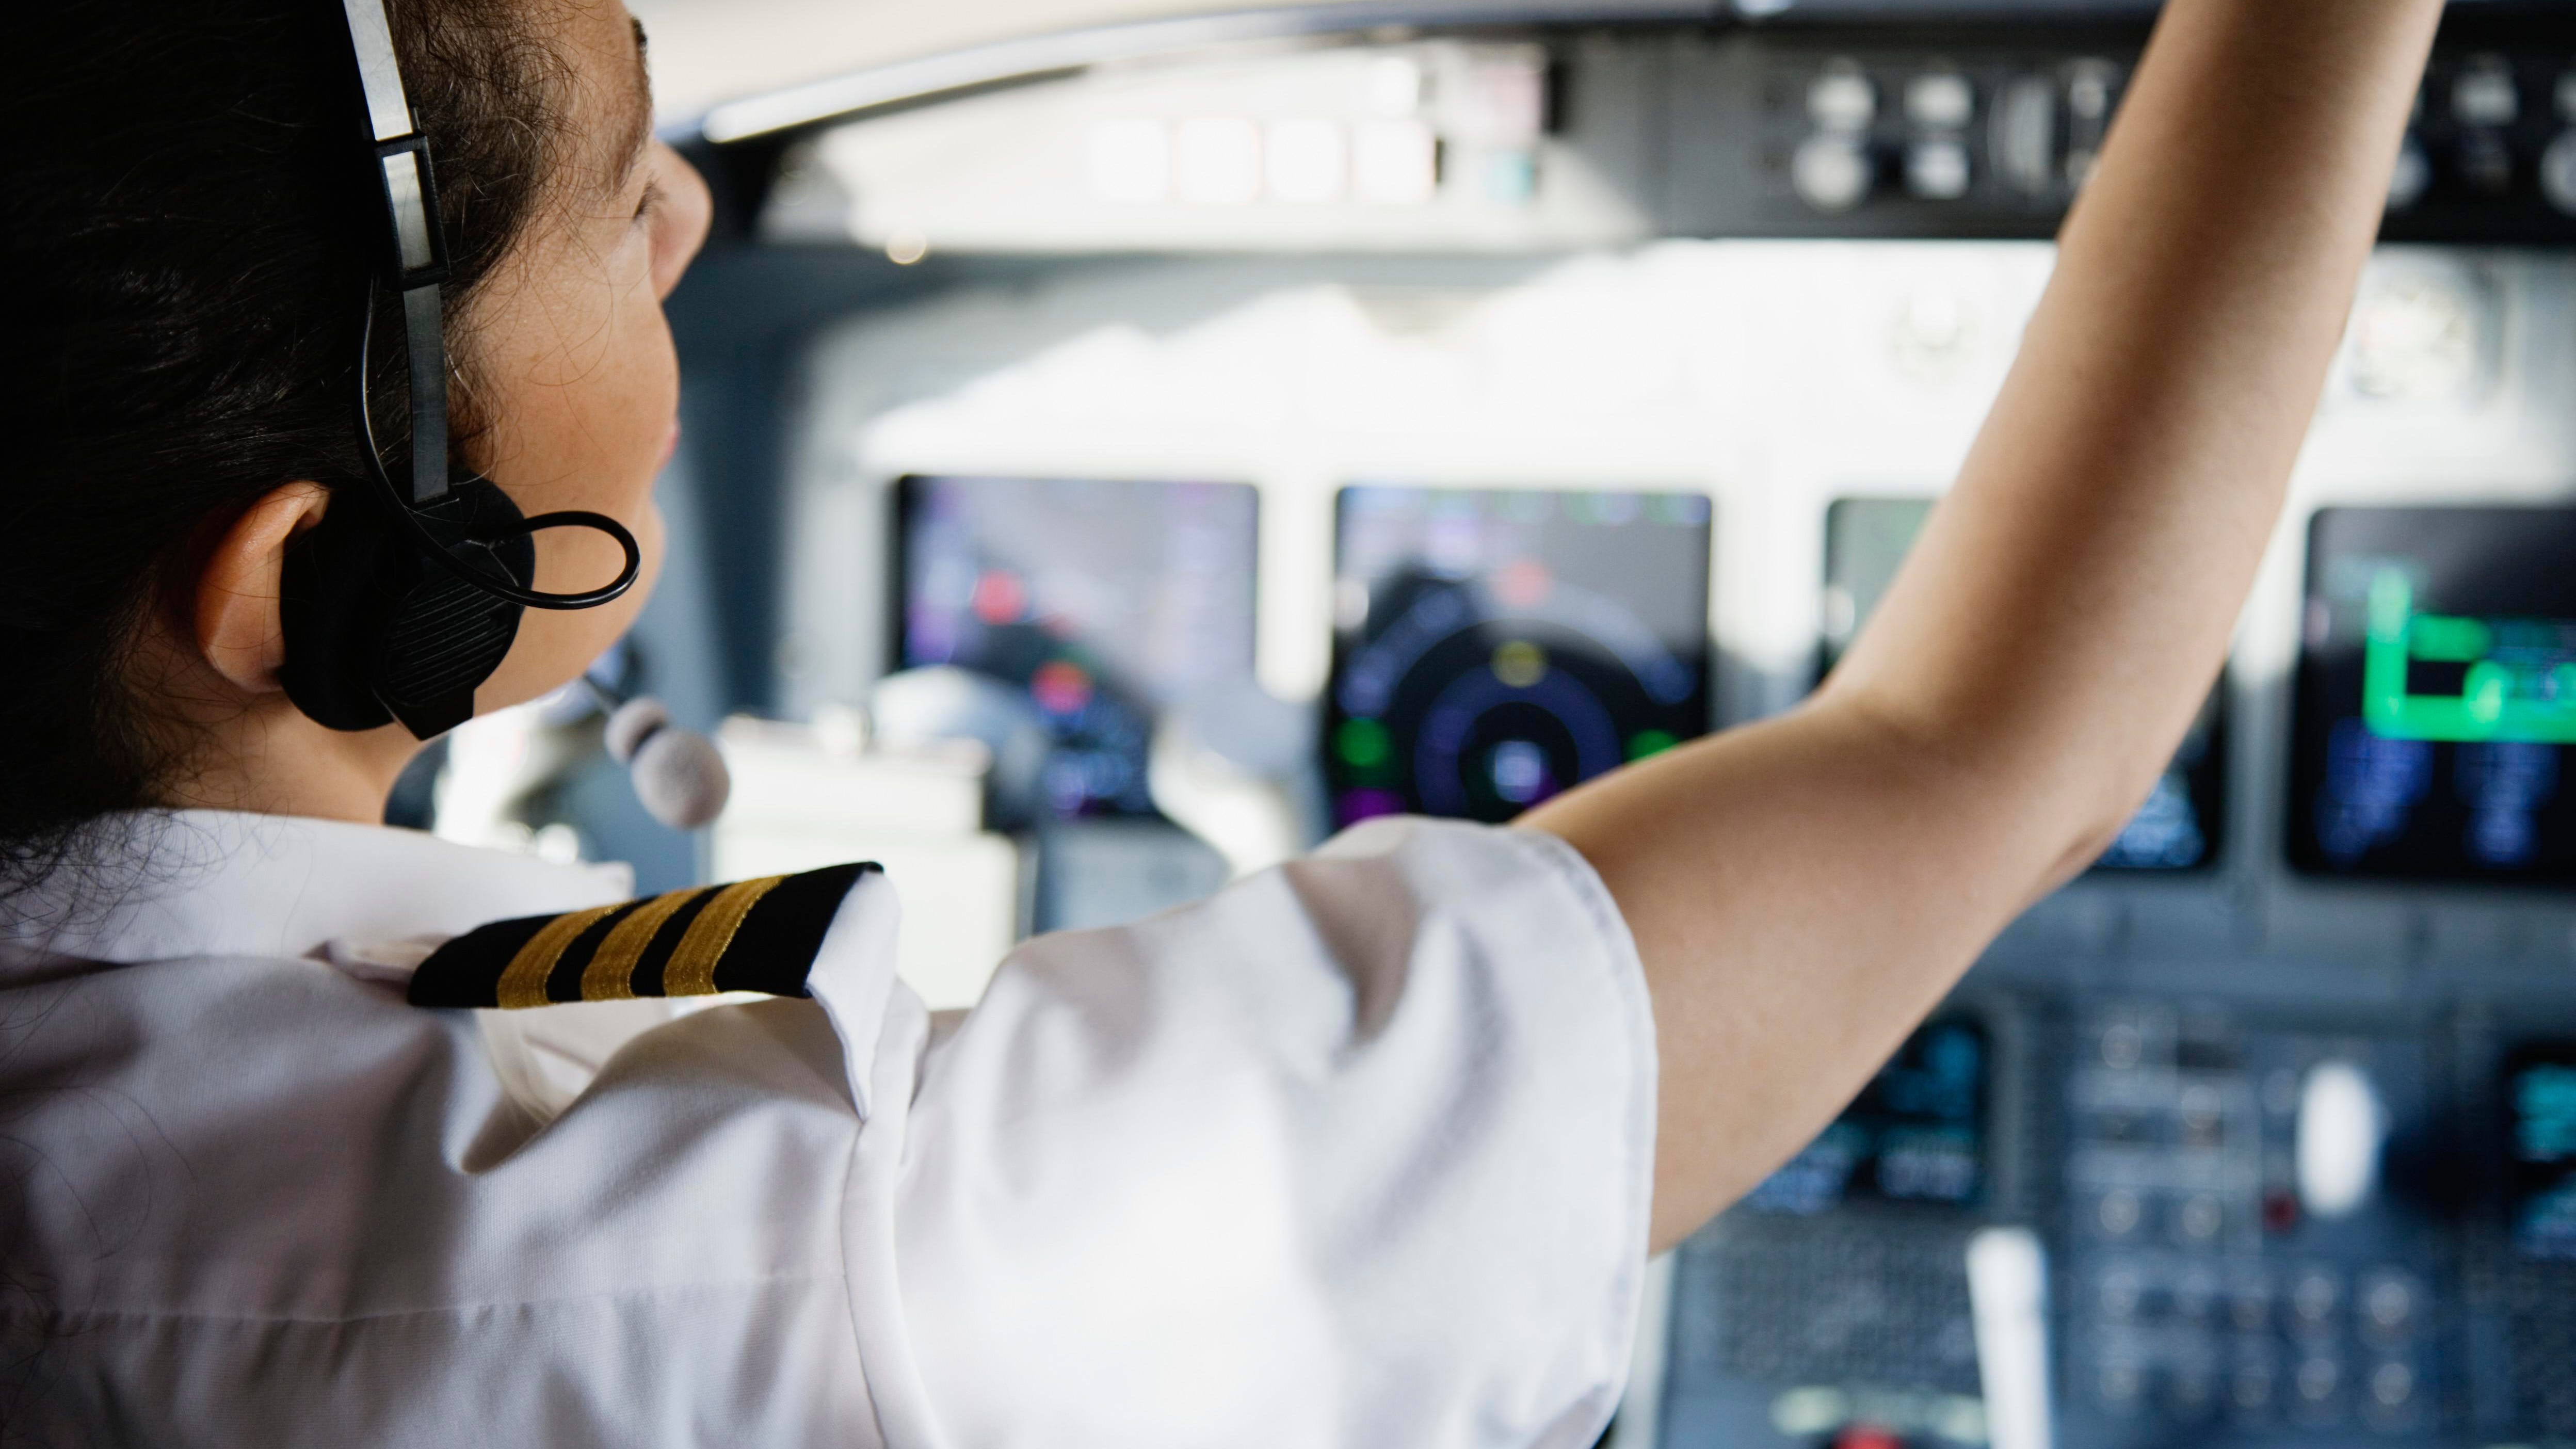 In Focusing On What Pilots Do Wrong, We May Be Missing Valuable Lessons From What They Quietly Do Right